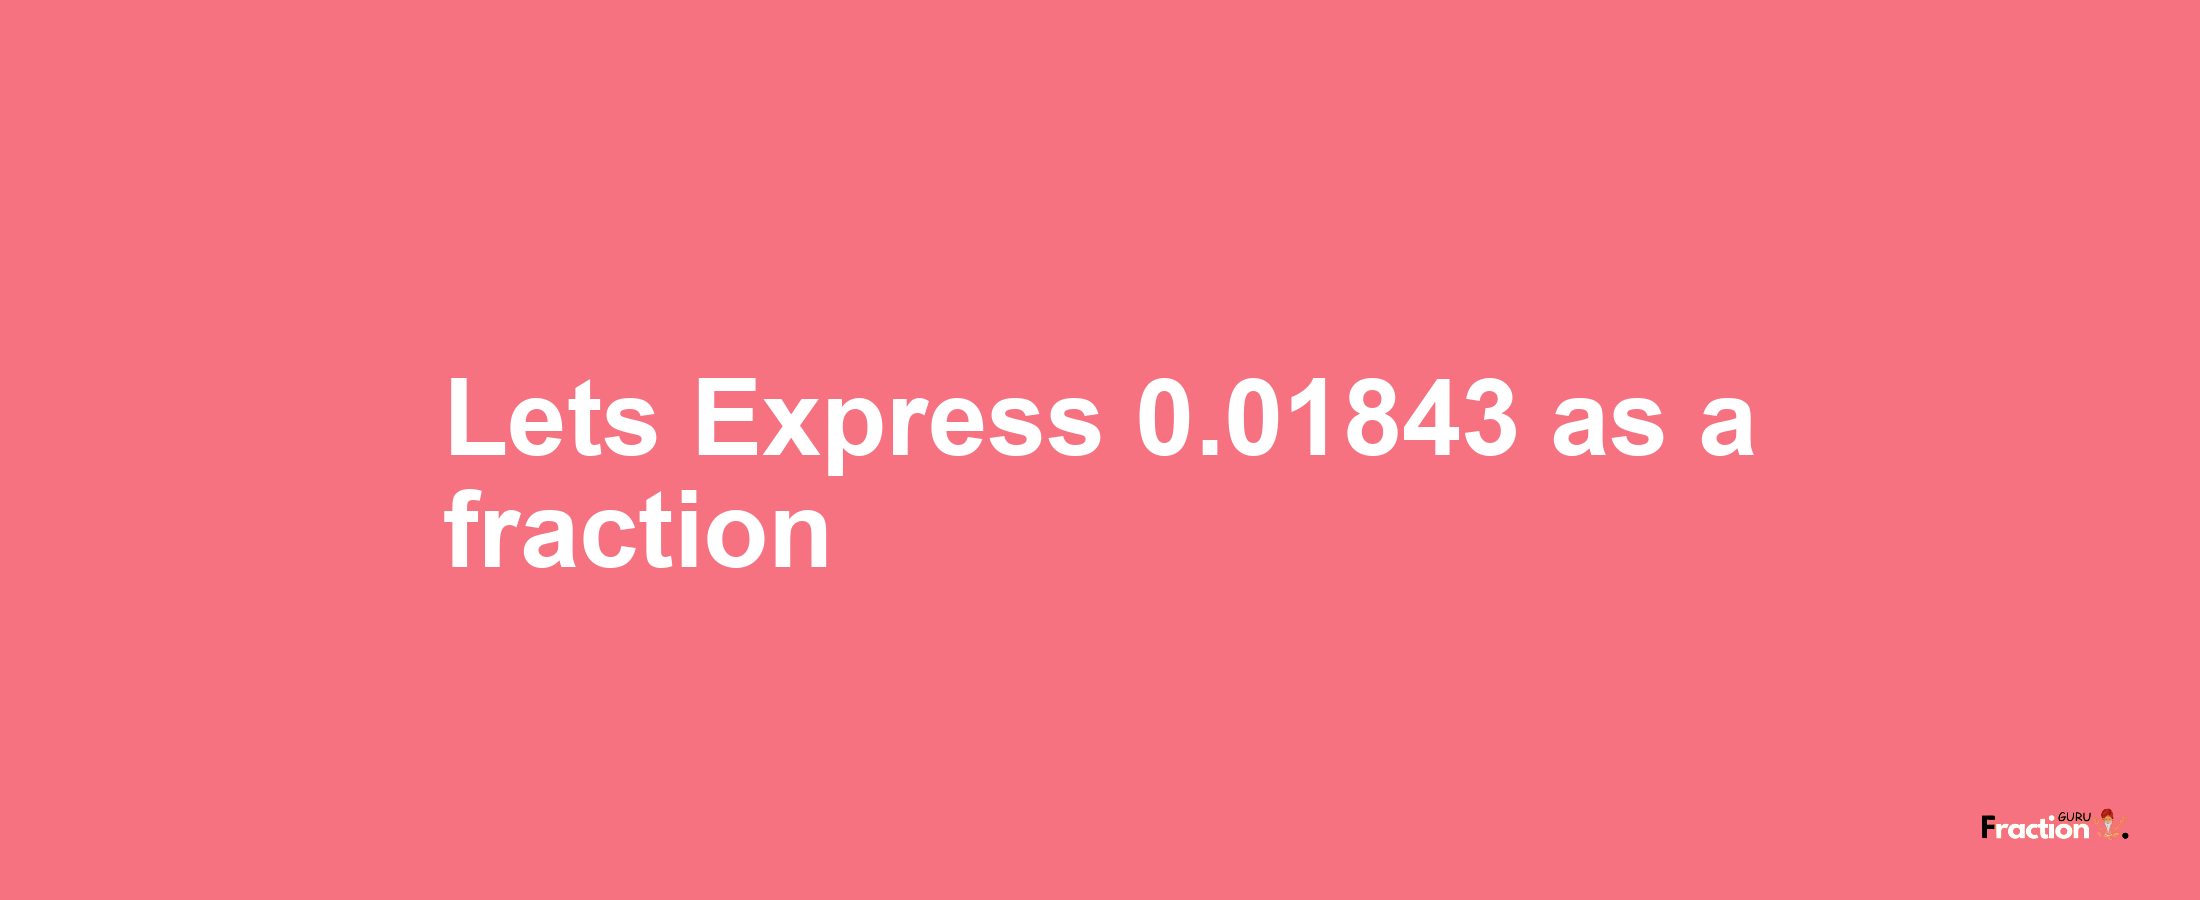 Lets Express 0.01843 as afraction